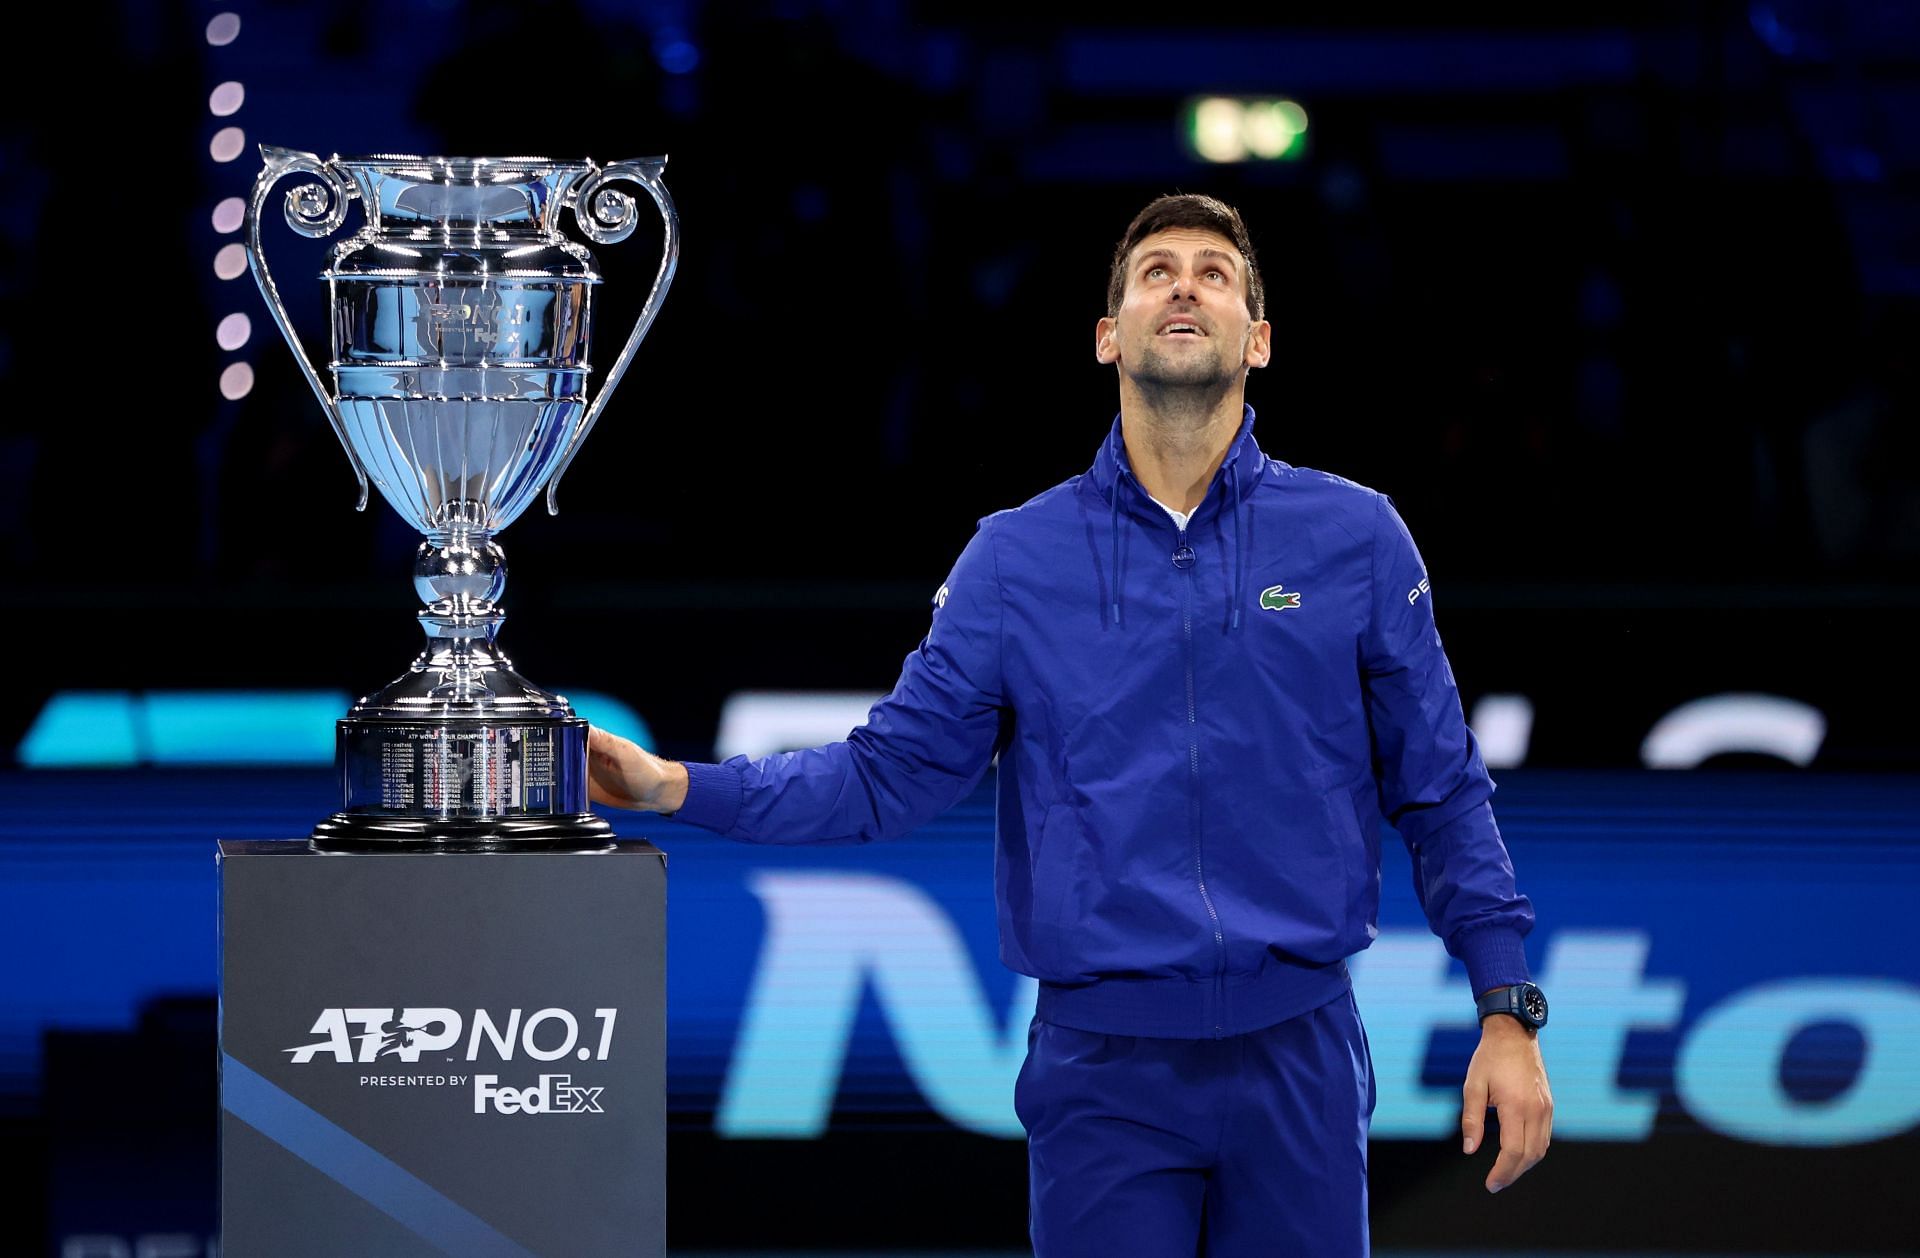 Novak Djokovic is the odds-on favorite to win the 2022 Monte-Carlo Masters